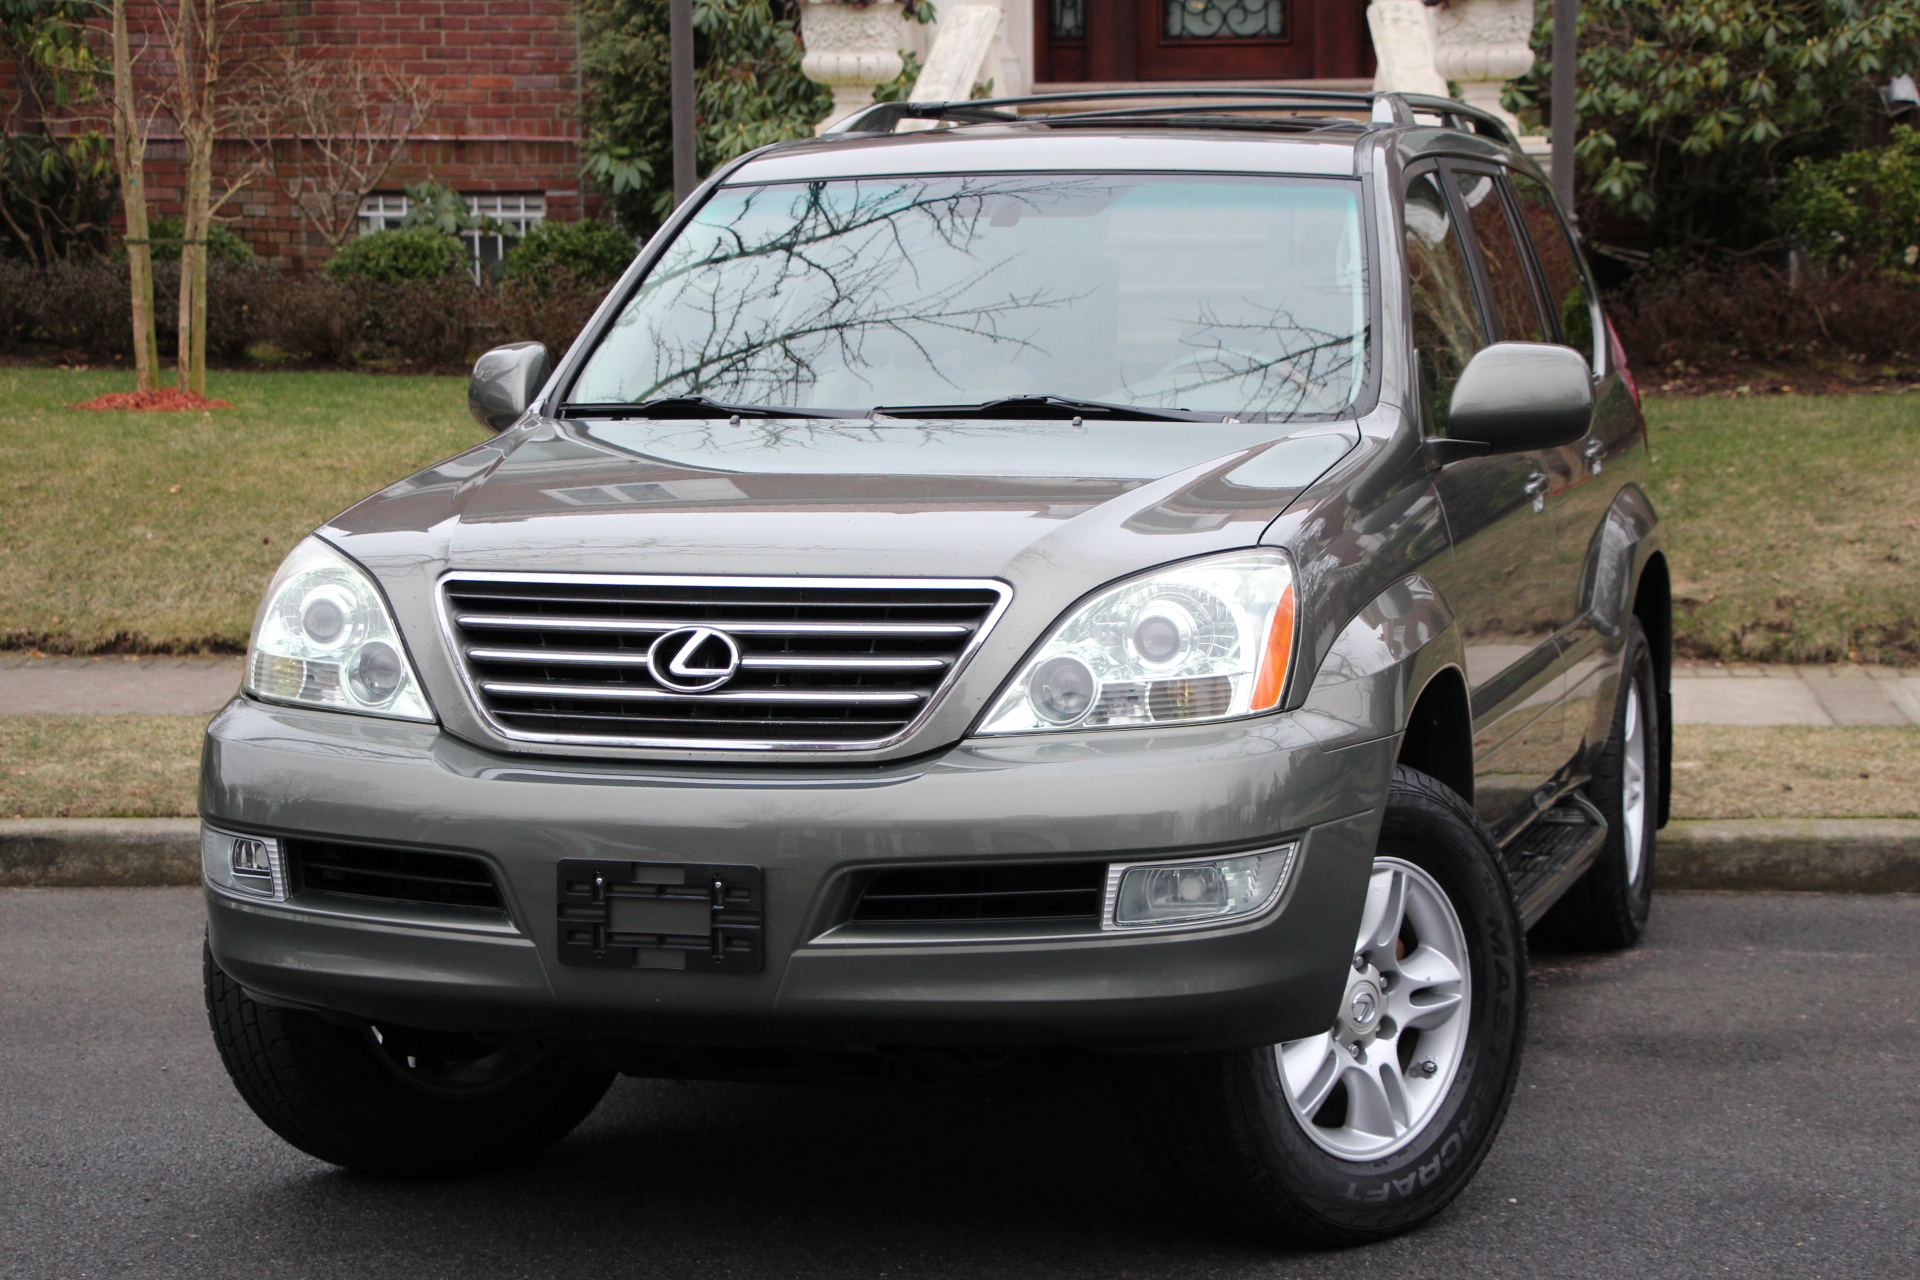 Buy Used 2006 LEXUS GX470 AWD PREMIUM for $9 900 from trusted dealer in  Brooklyn, NY!